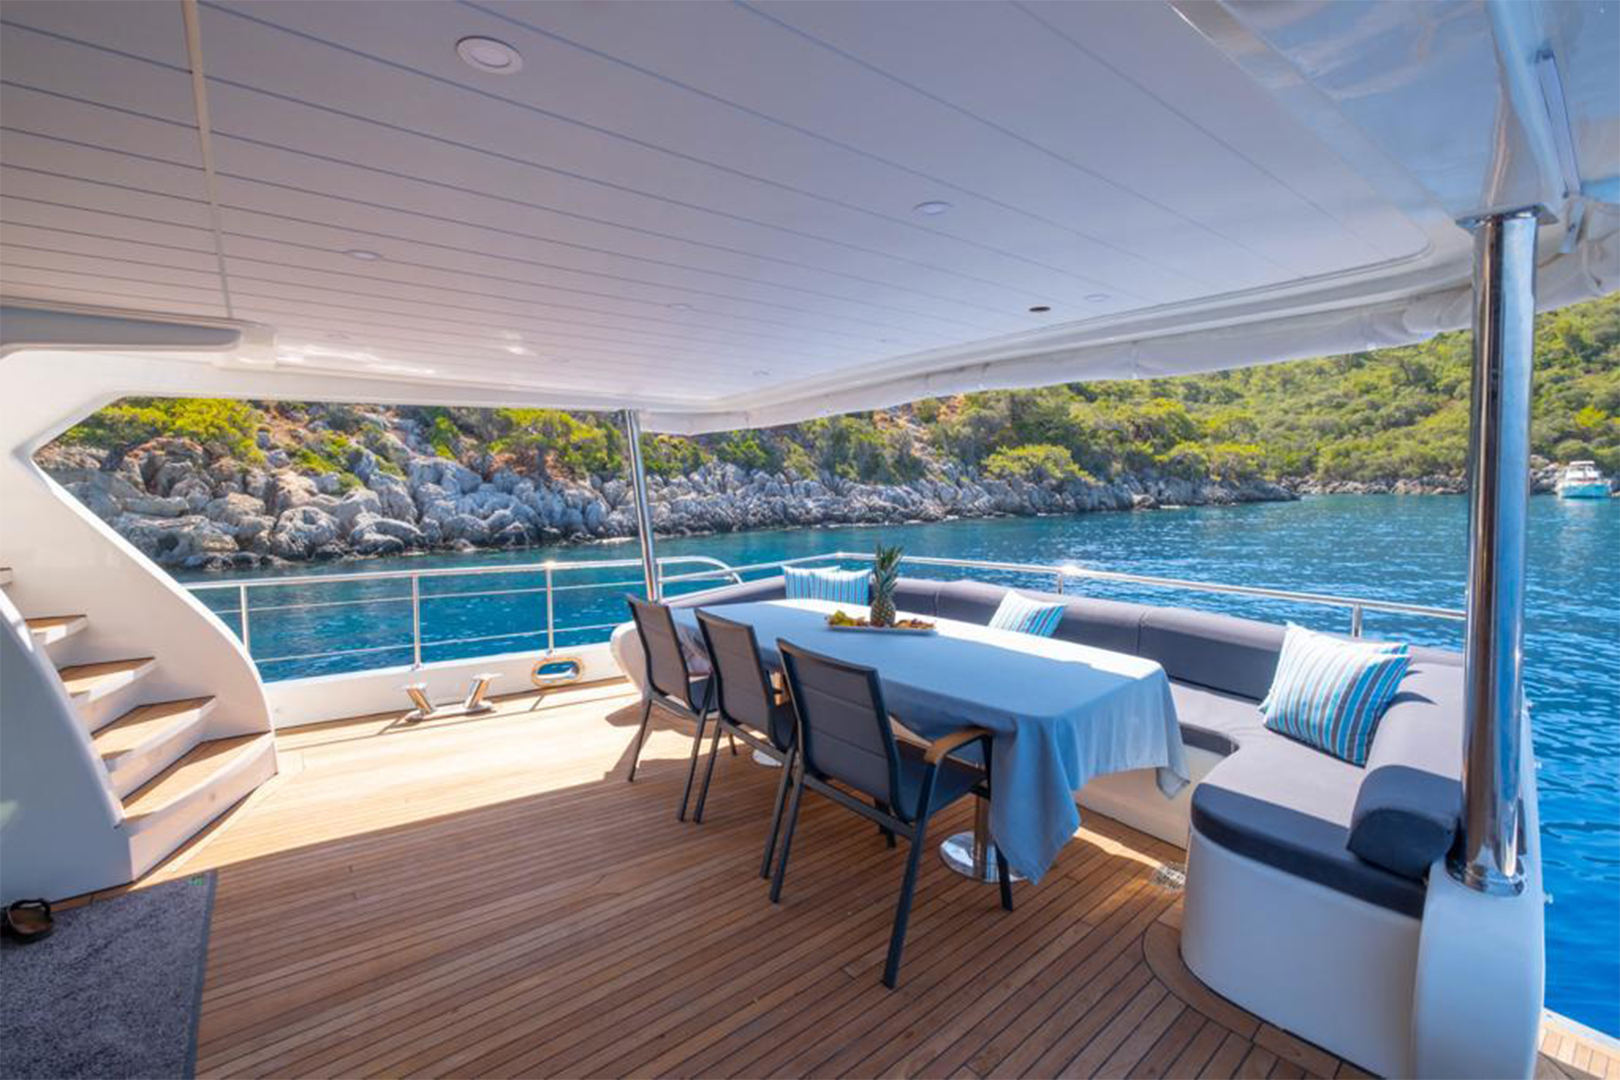 Aft deck with alfresco dining area